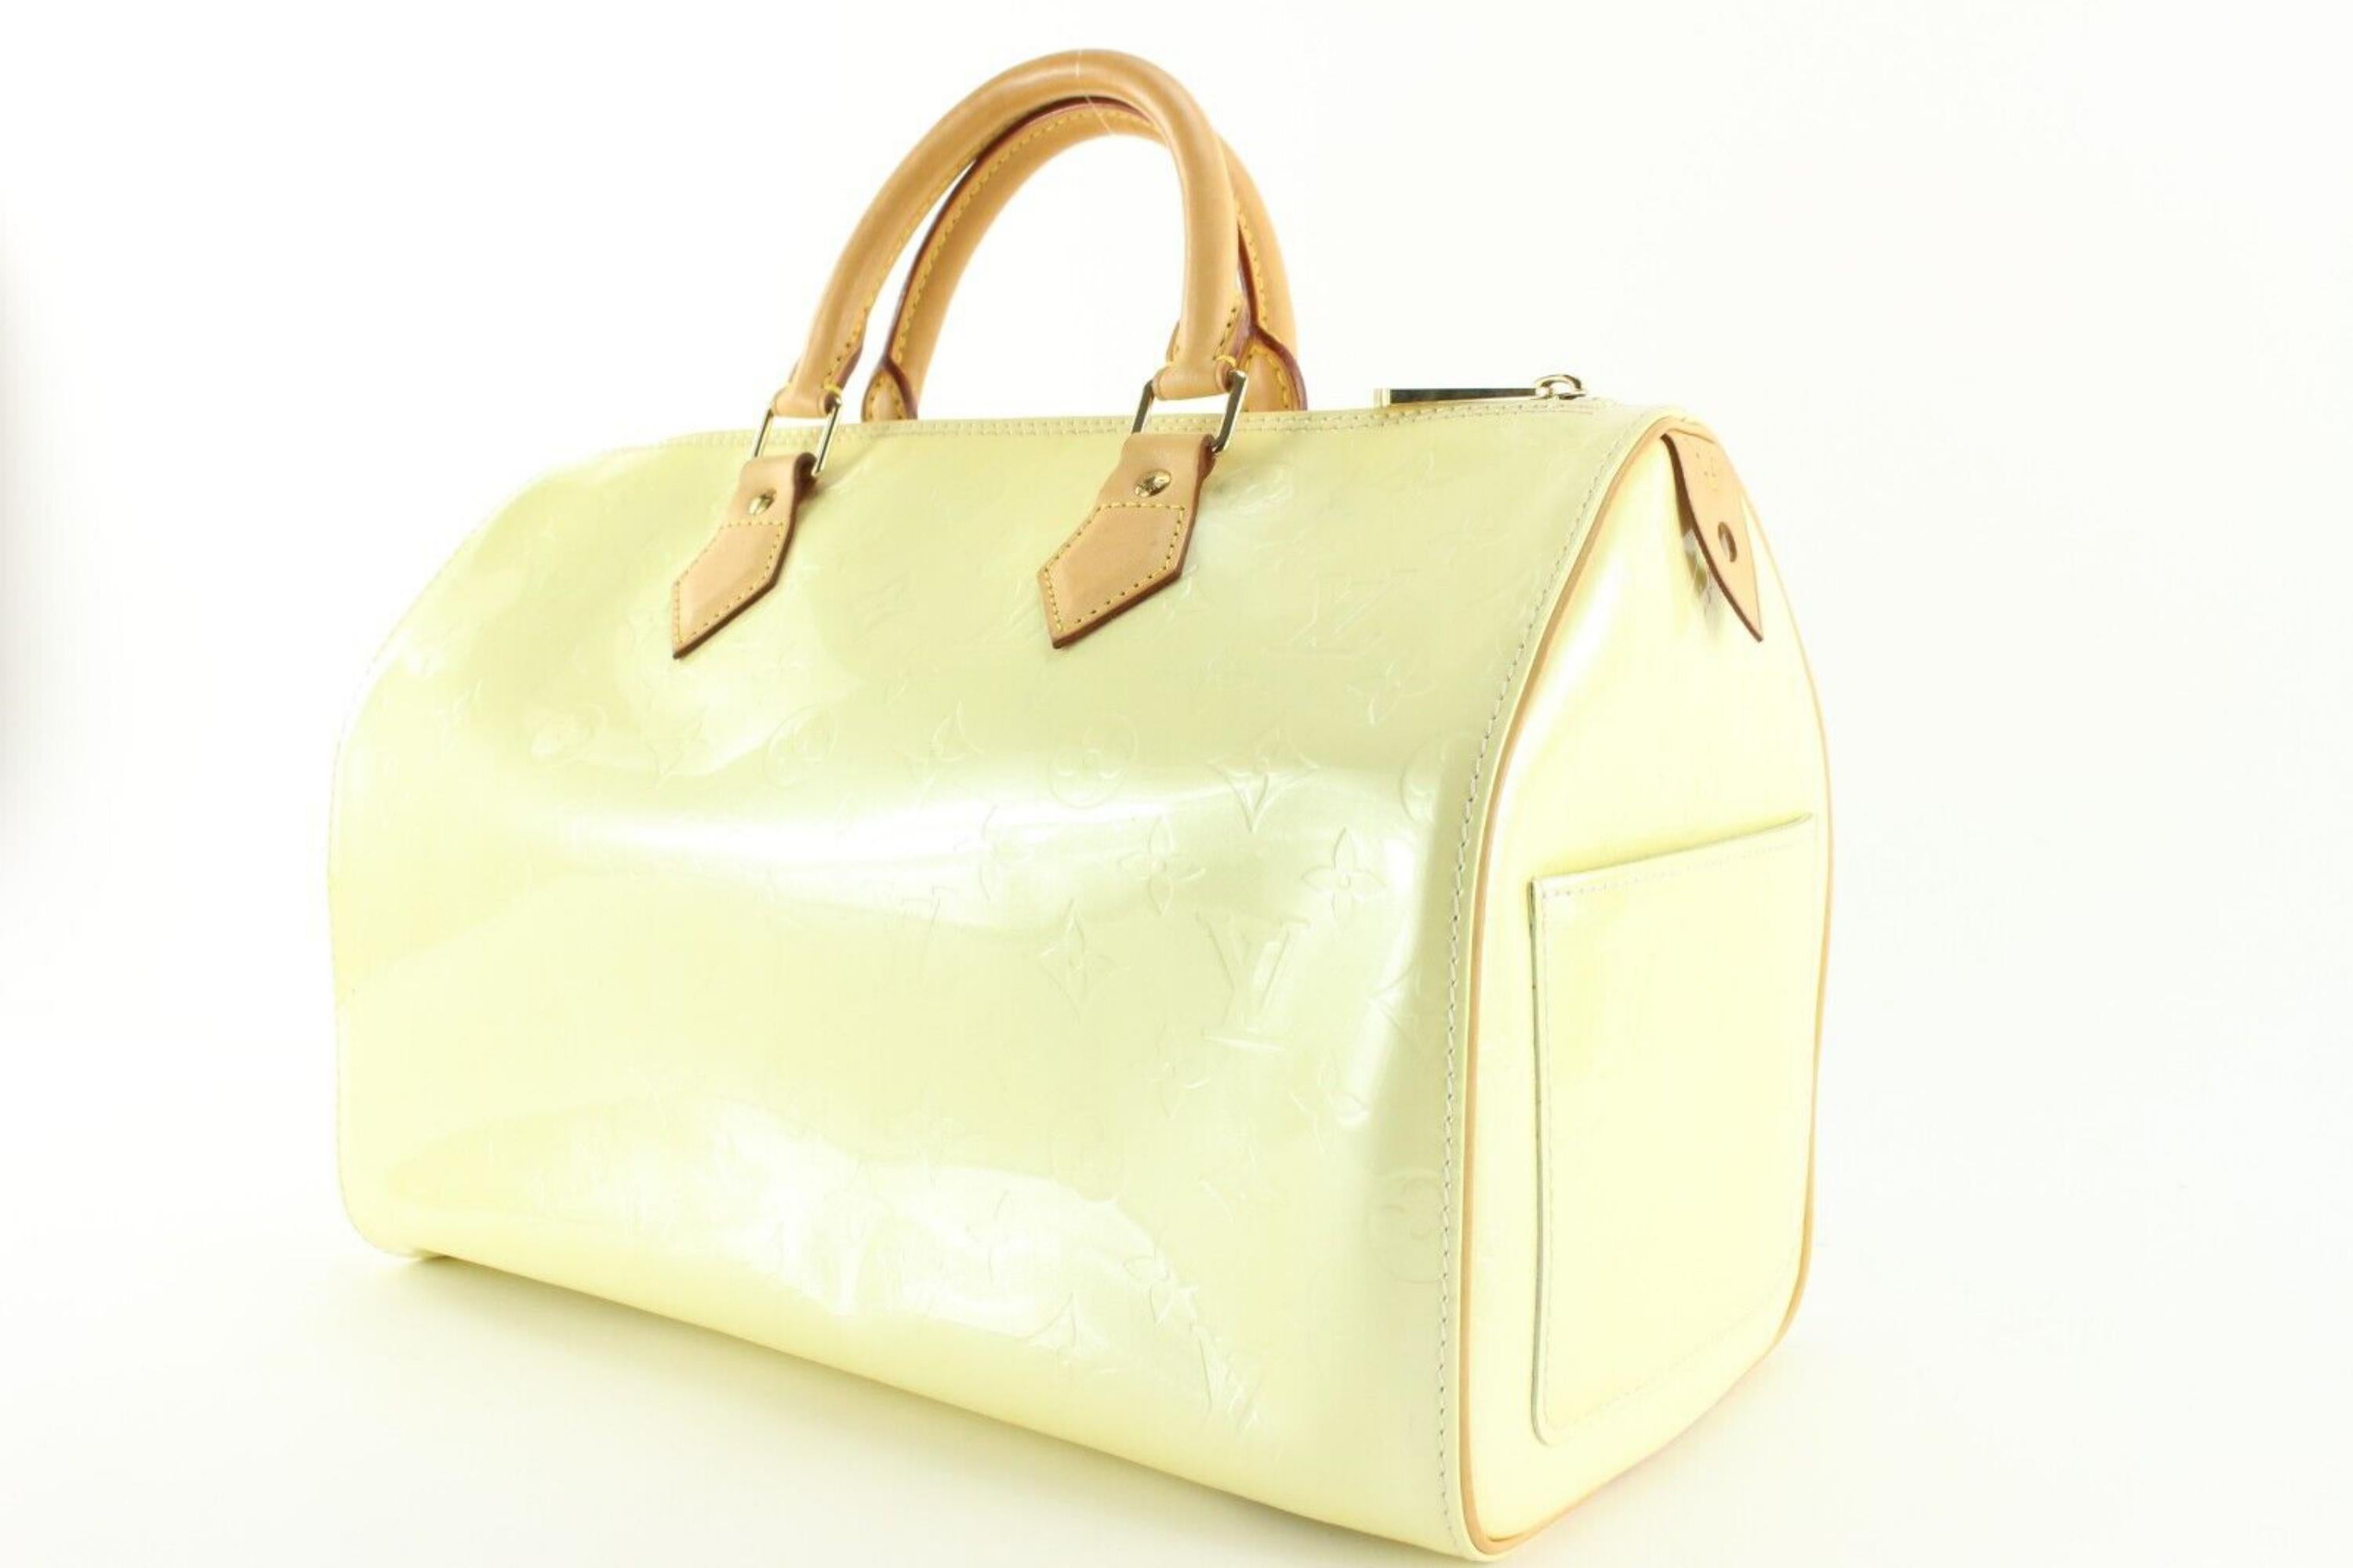 Louis Vuitton Extremely Rare Perle Vernis Speedy 35 3LVJ1108 For Sale 5